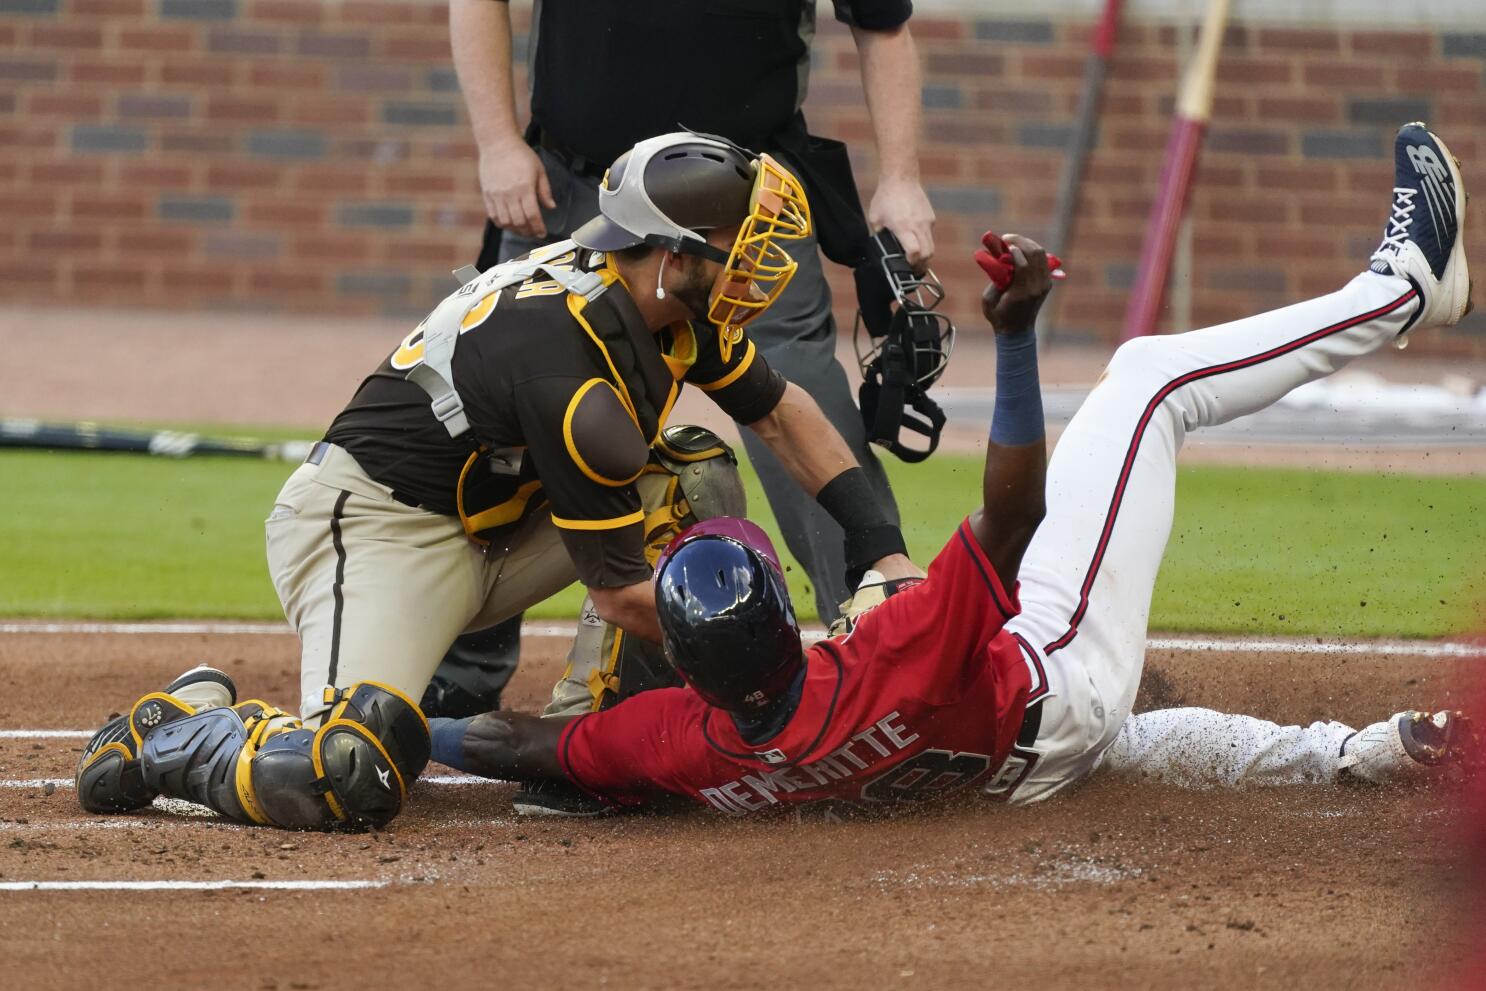 Travis Demeritte flew around the bases for this inside-the-park